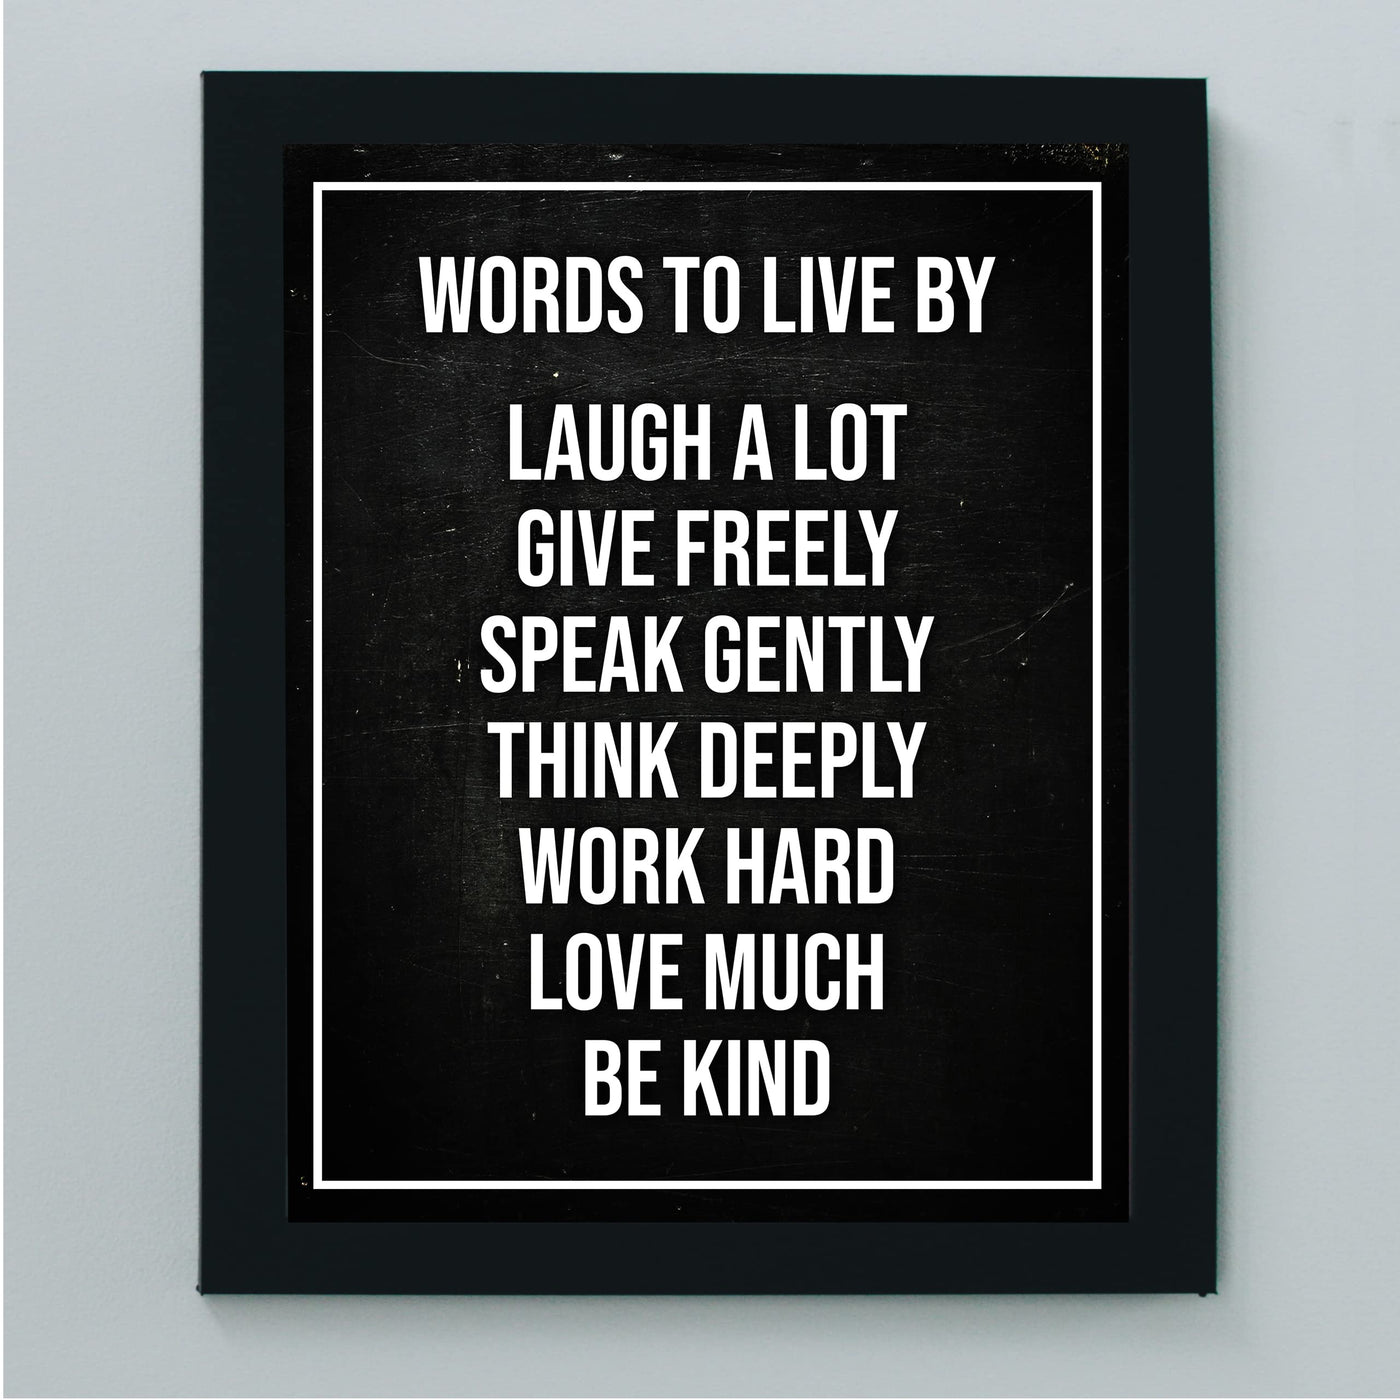 Words to Live By Inspirational Quotes Wall Sign -8 x 10" Motivational Typography Art Print-Ready to Frame. Rustic Decor for Home-Office-School-Work. Great Life Lessons for Motivation & Inspiration!